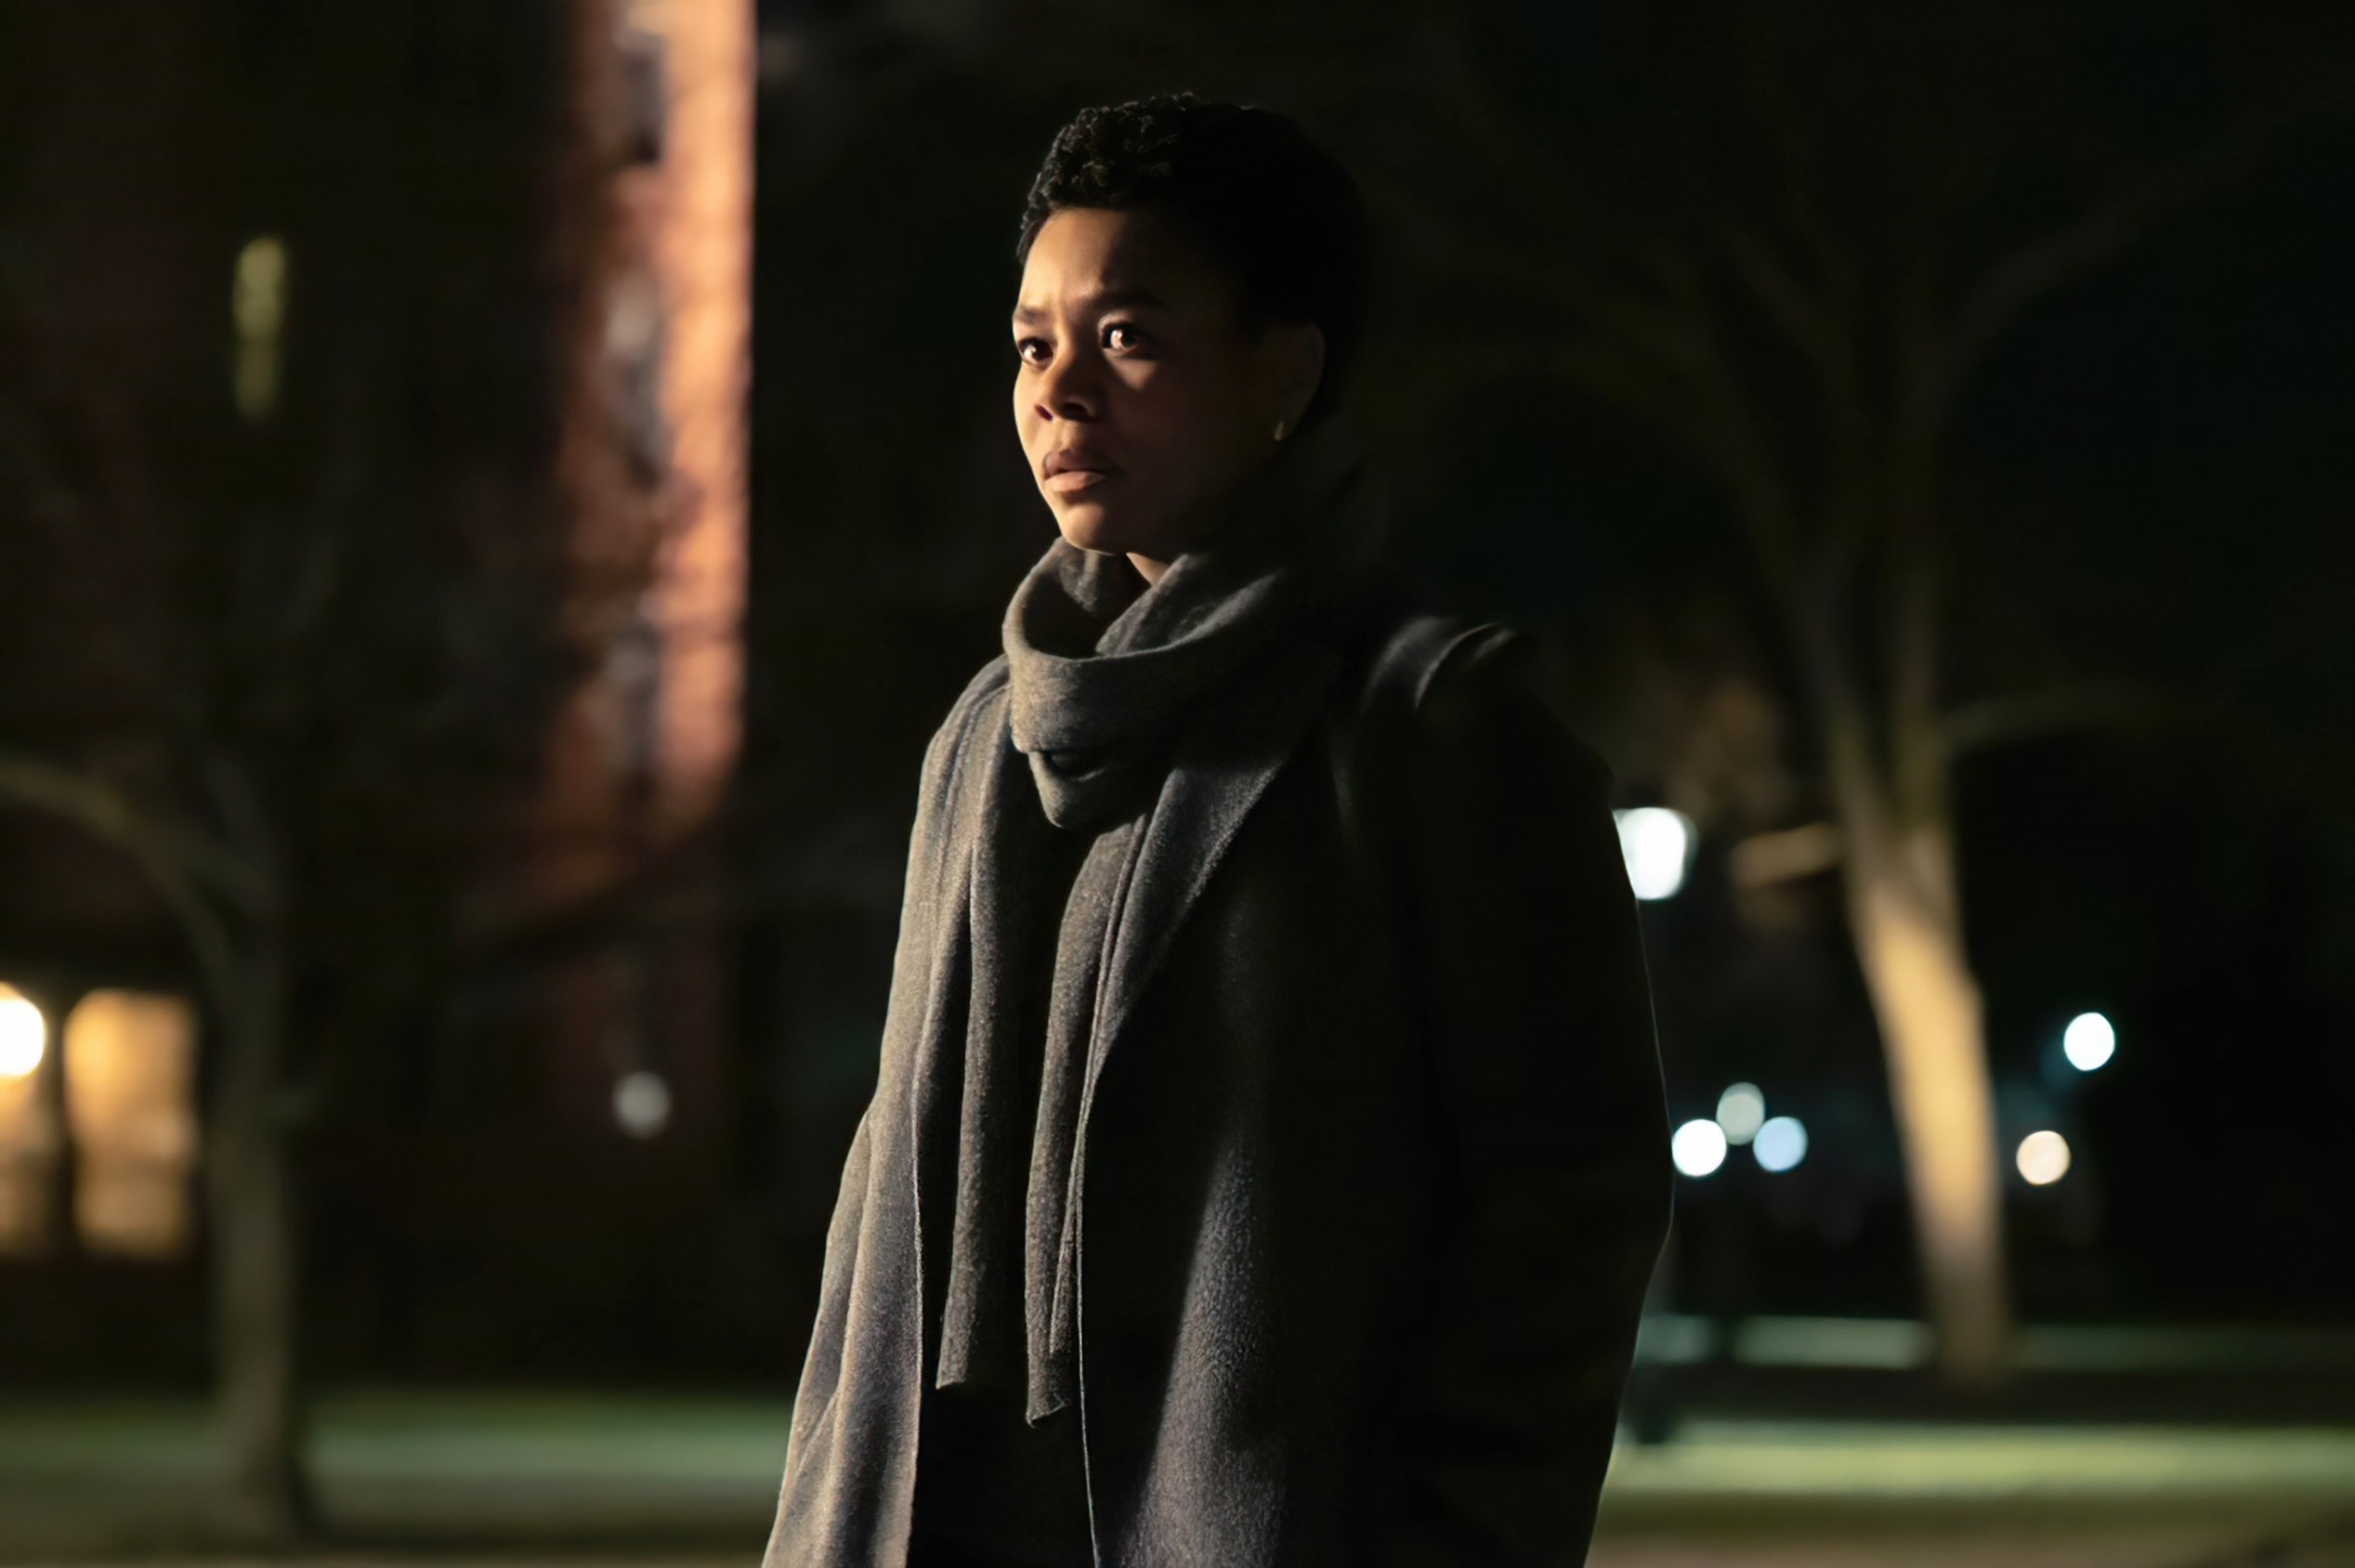 Regina Hall stands on a campus at night